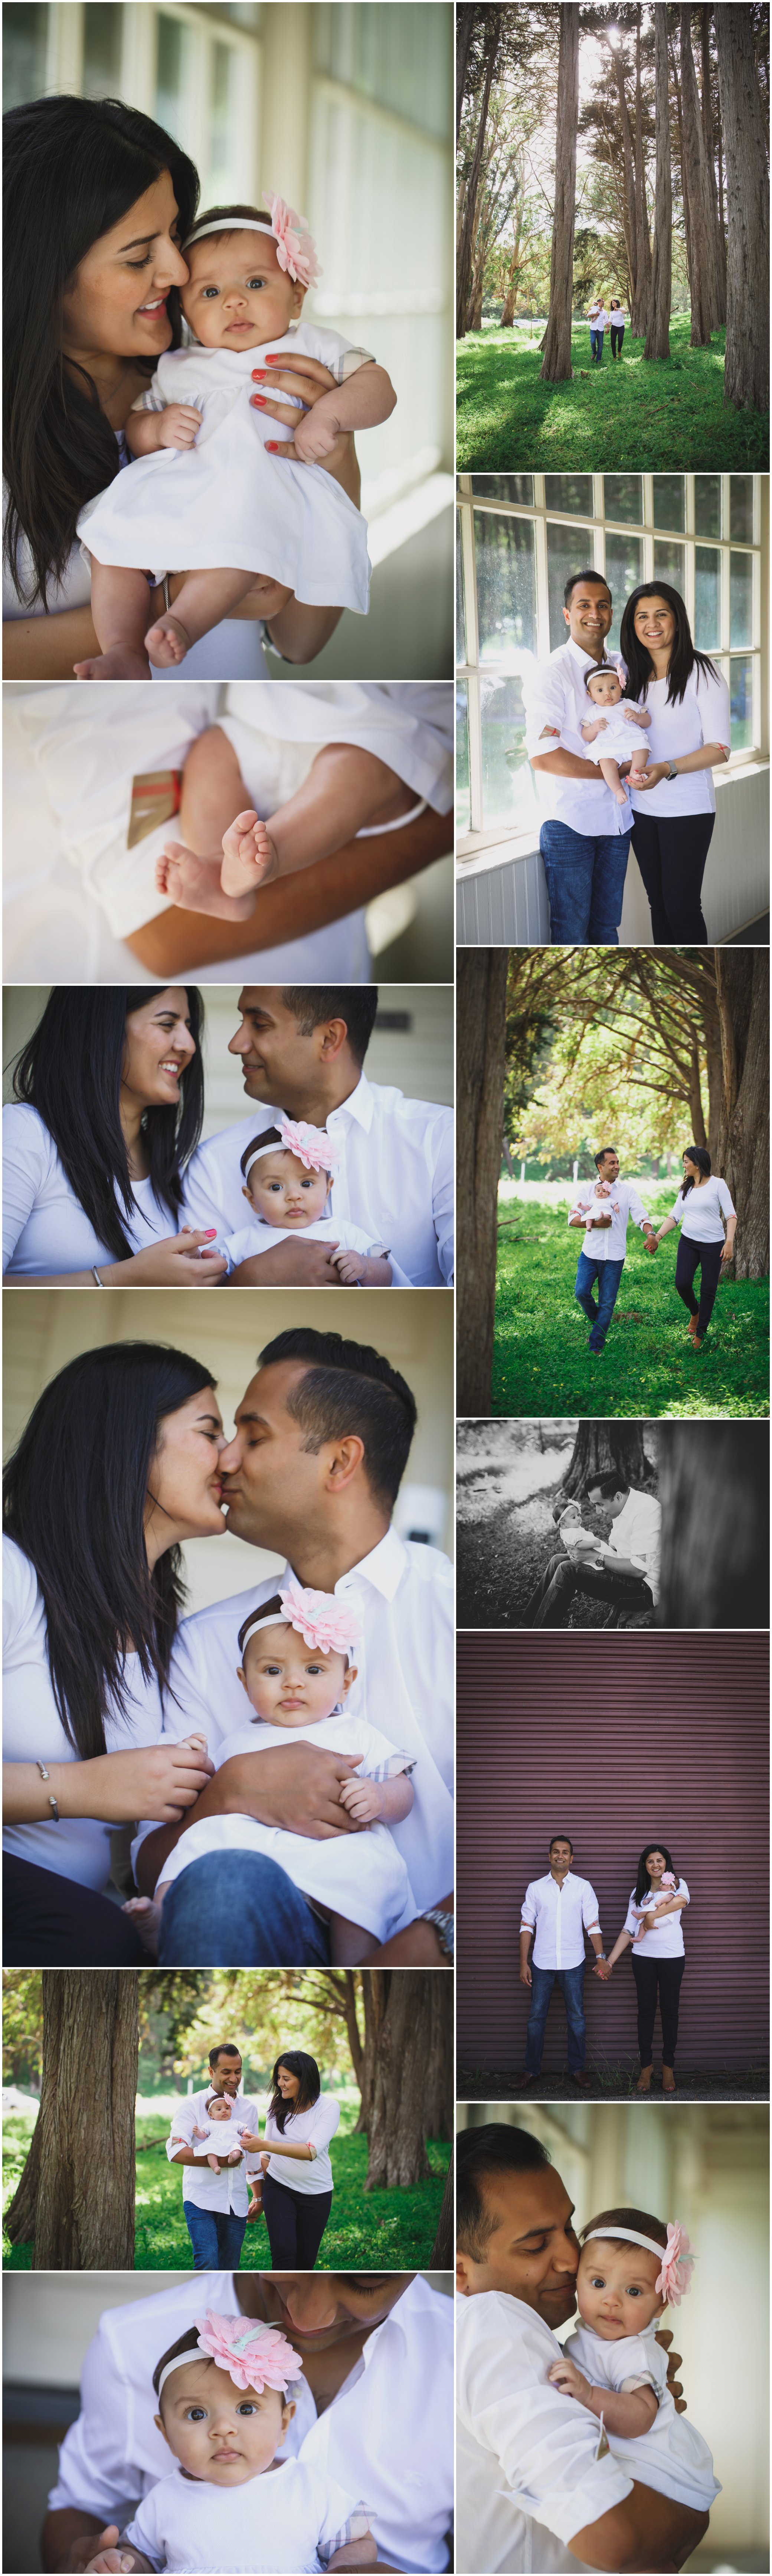 Family Photography Session at Cavallo Point, by Katie Rain